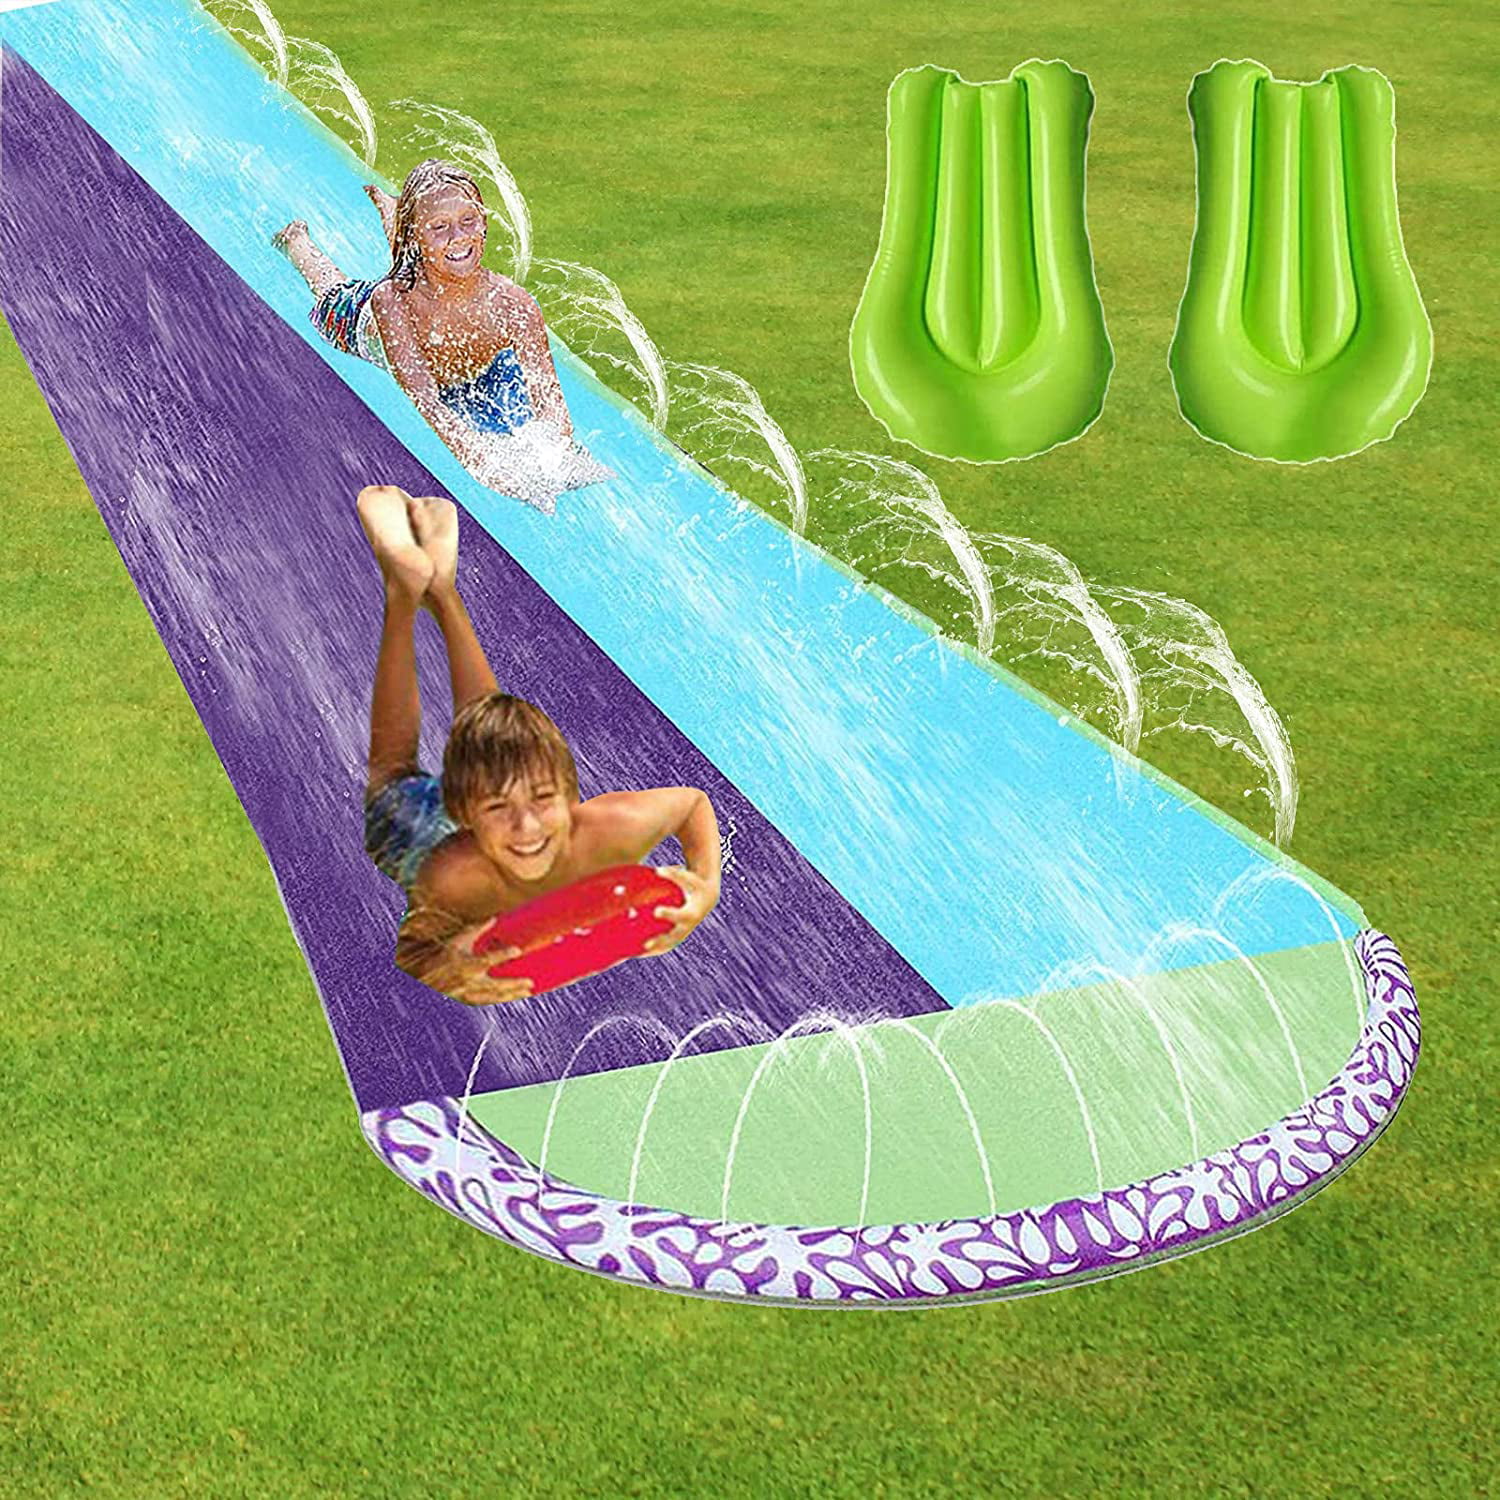 Large Water Slide for Children 3+ Easy to Store and Clean Super Fun Slippery Racer for Summer Outdoor Waterplay 192 Inflatable Slide for Kids Splash Buddies Single Slip n Slide with Sprinkler 